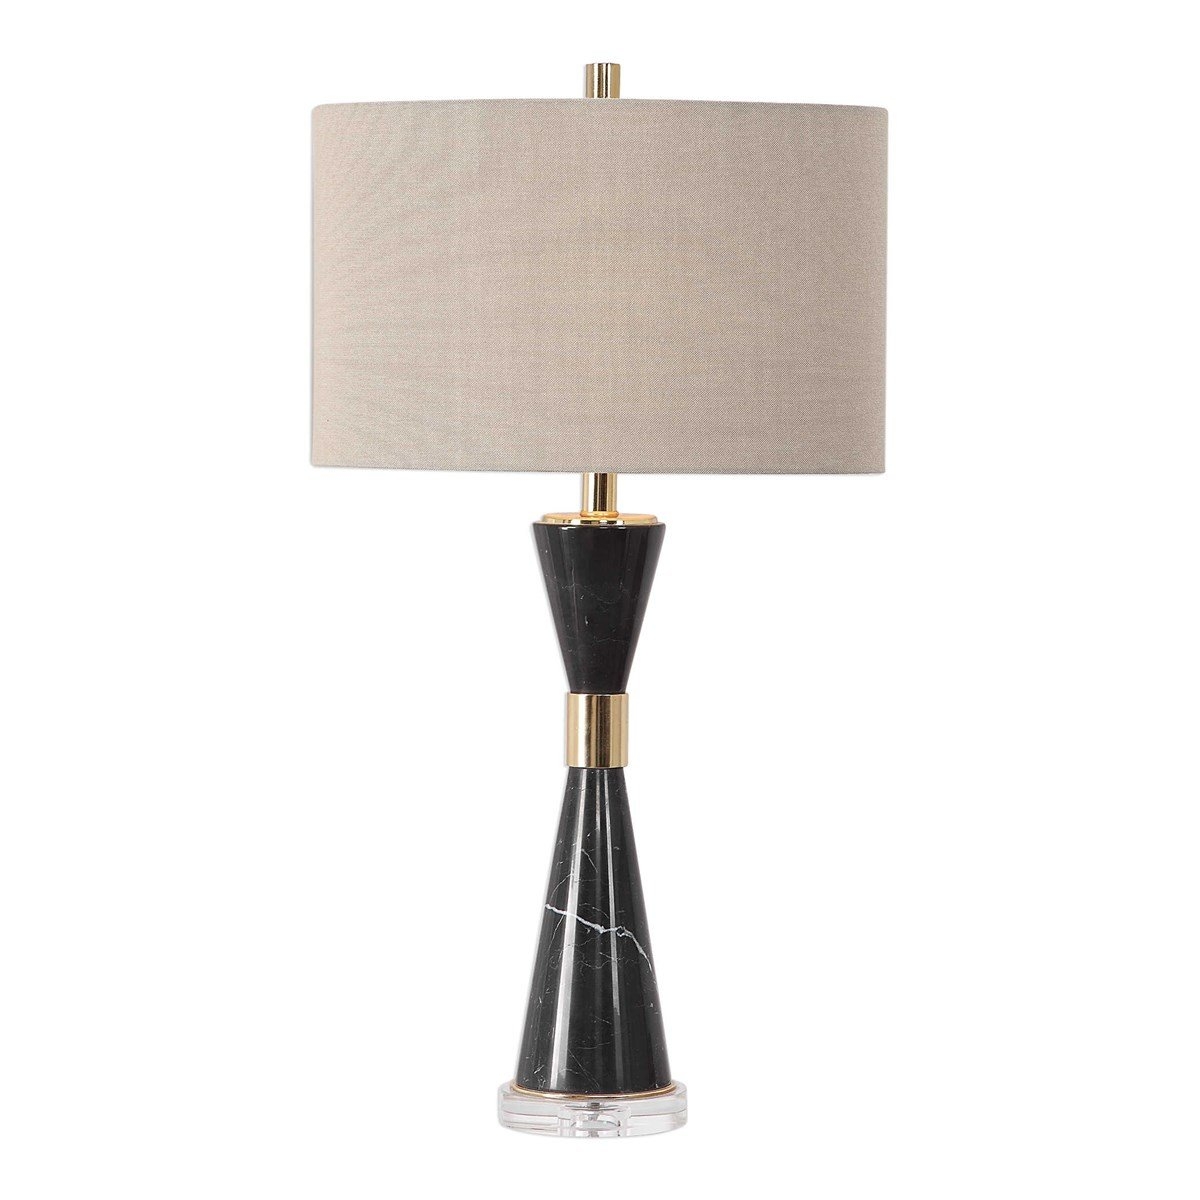 Alastair Black Marble Hourglass Table Lamp - #27886 - Image 0